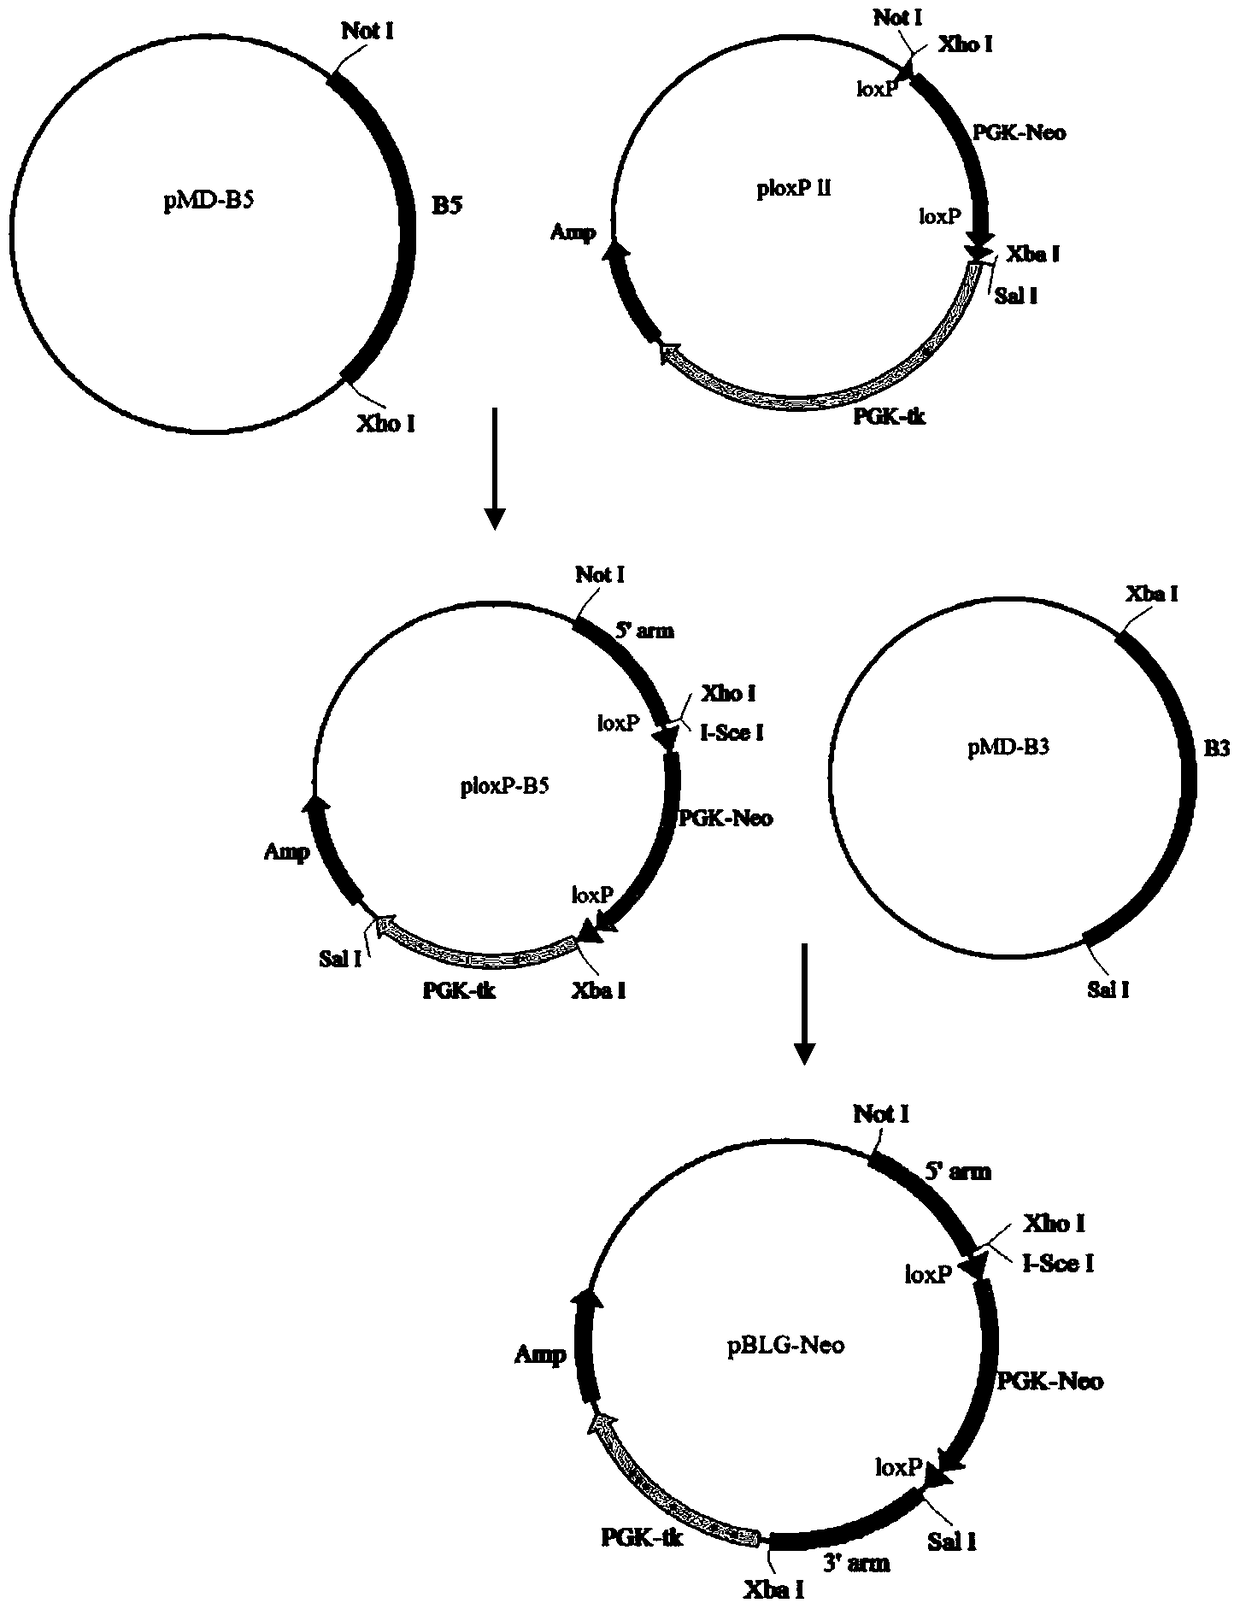 A vector and recombinant cells for goat blg knockout based on talen-mediated gene targeting